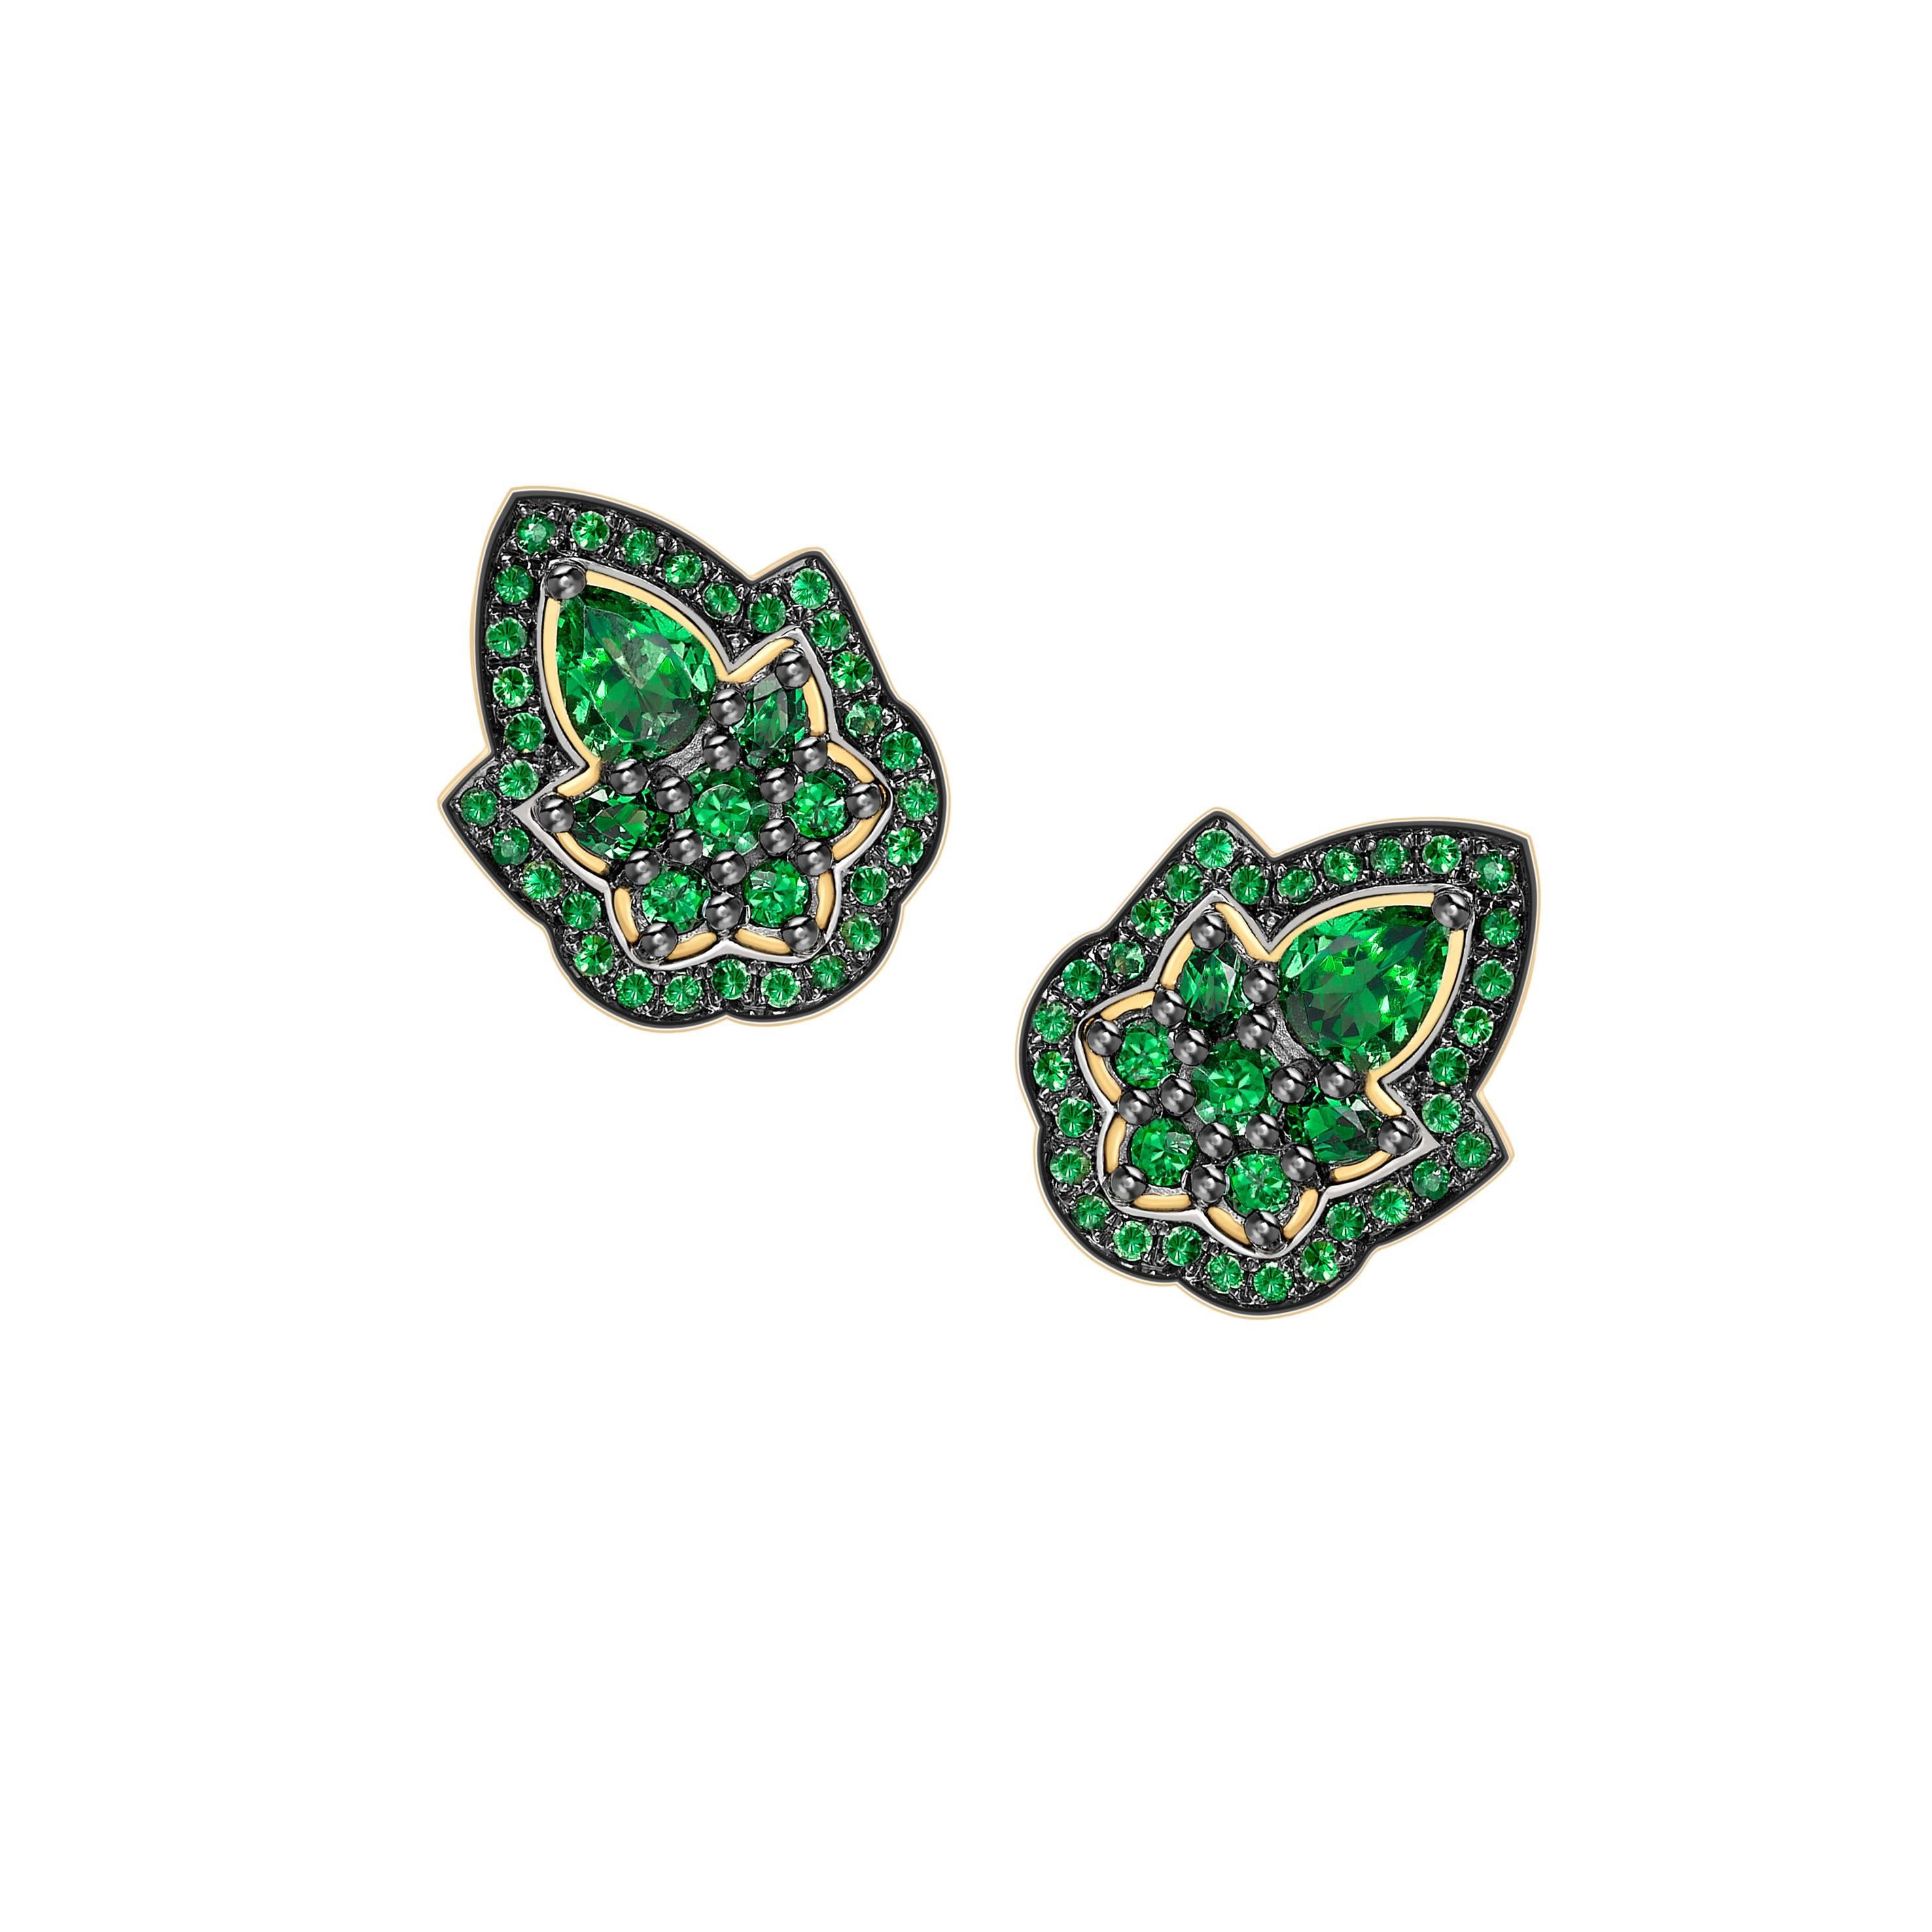 These studs have been handcrafted in London using 18ct yellow gold and are set with 2.40ct of vivid green natural tsavorites. The top of the earrings have a black rhodium finish to contrast with the yellow gold and the vivid green tsavorites.

width